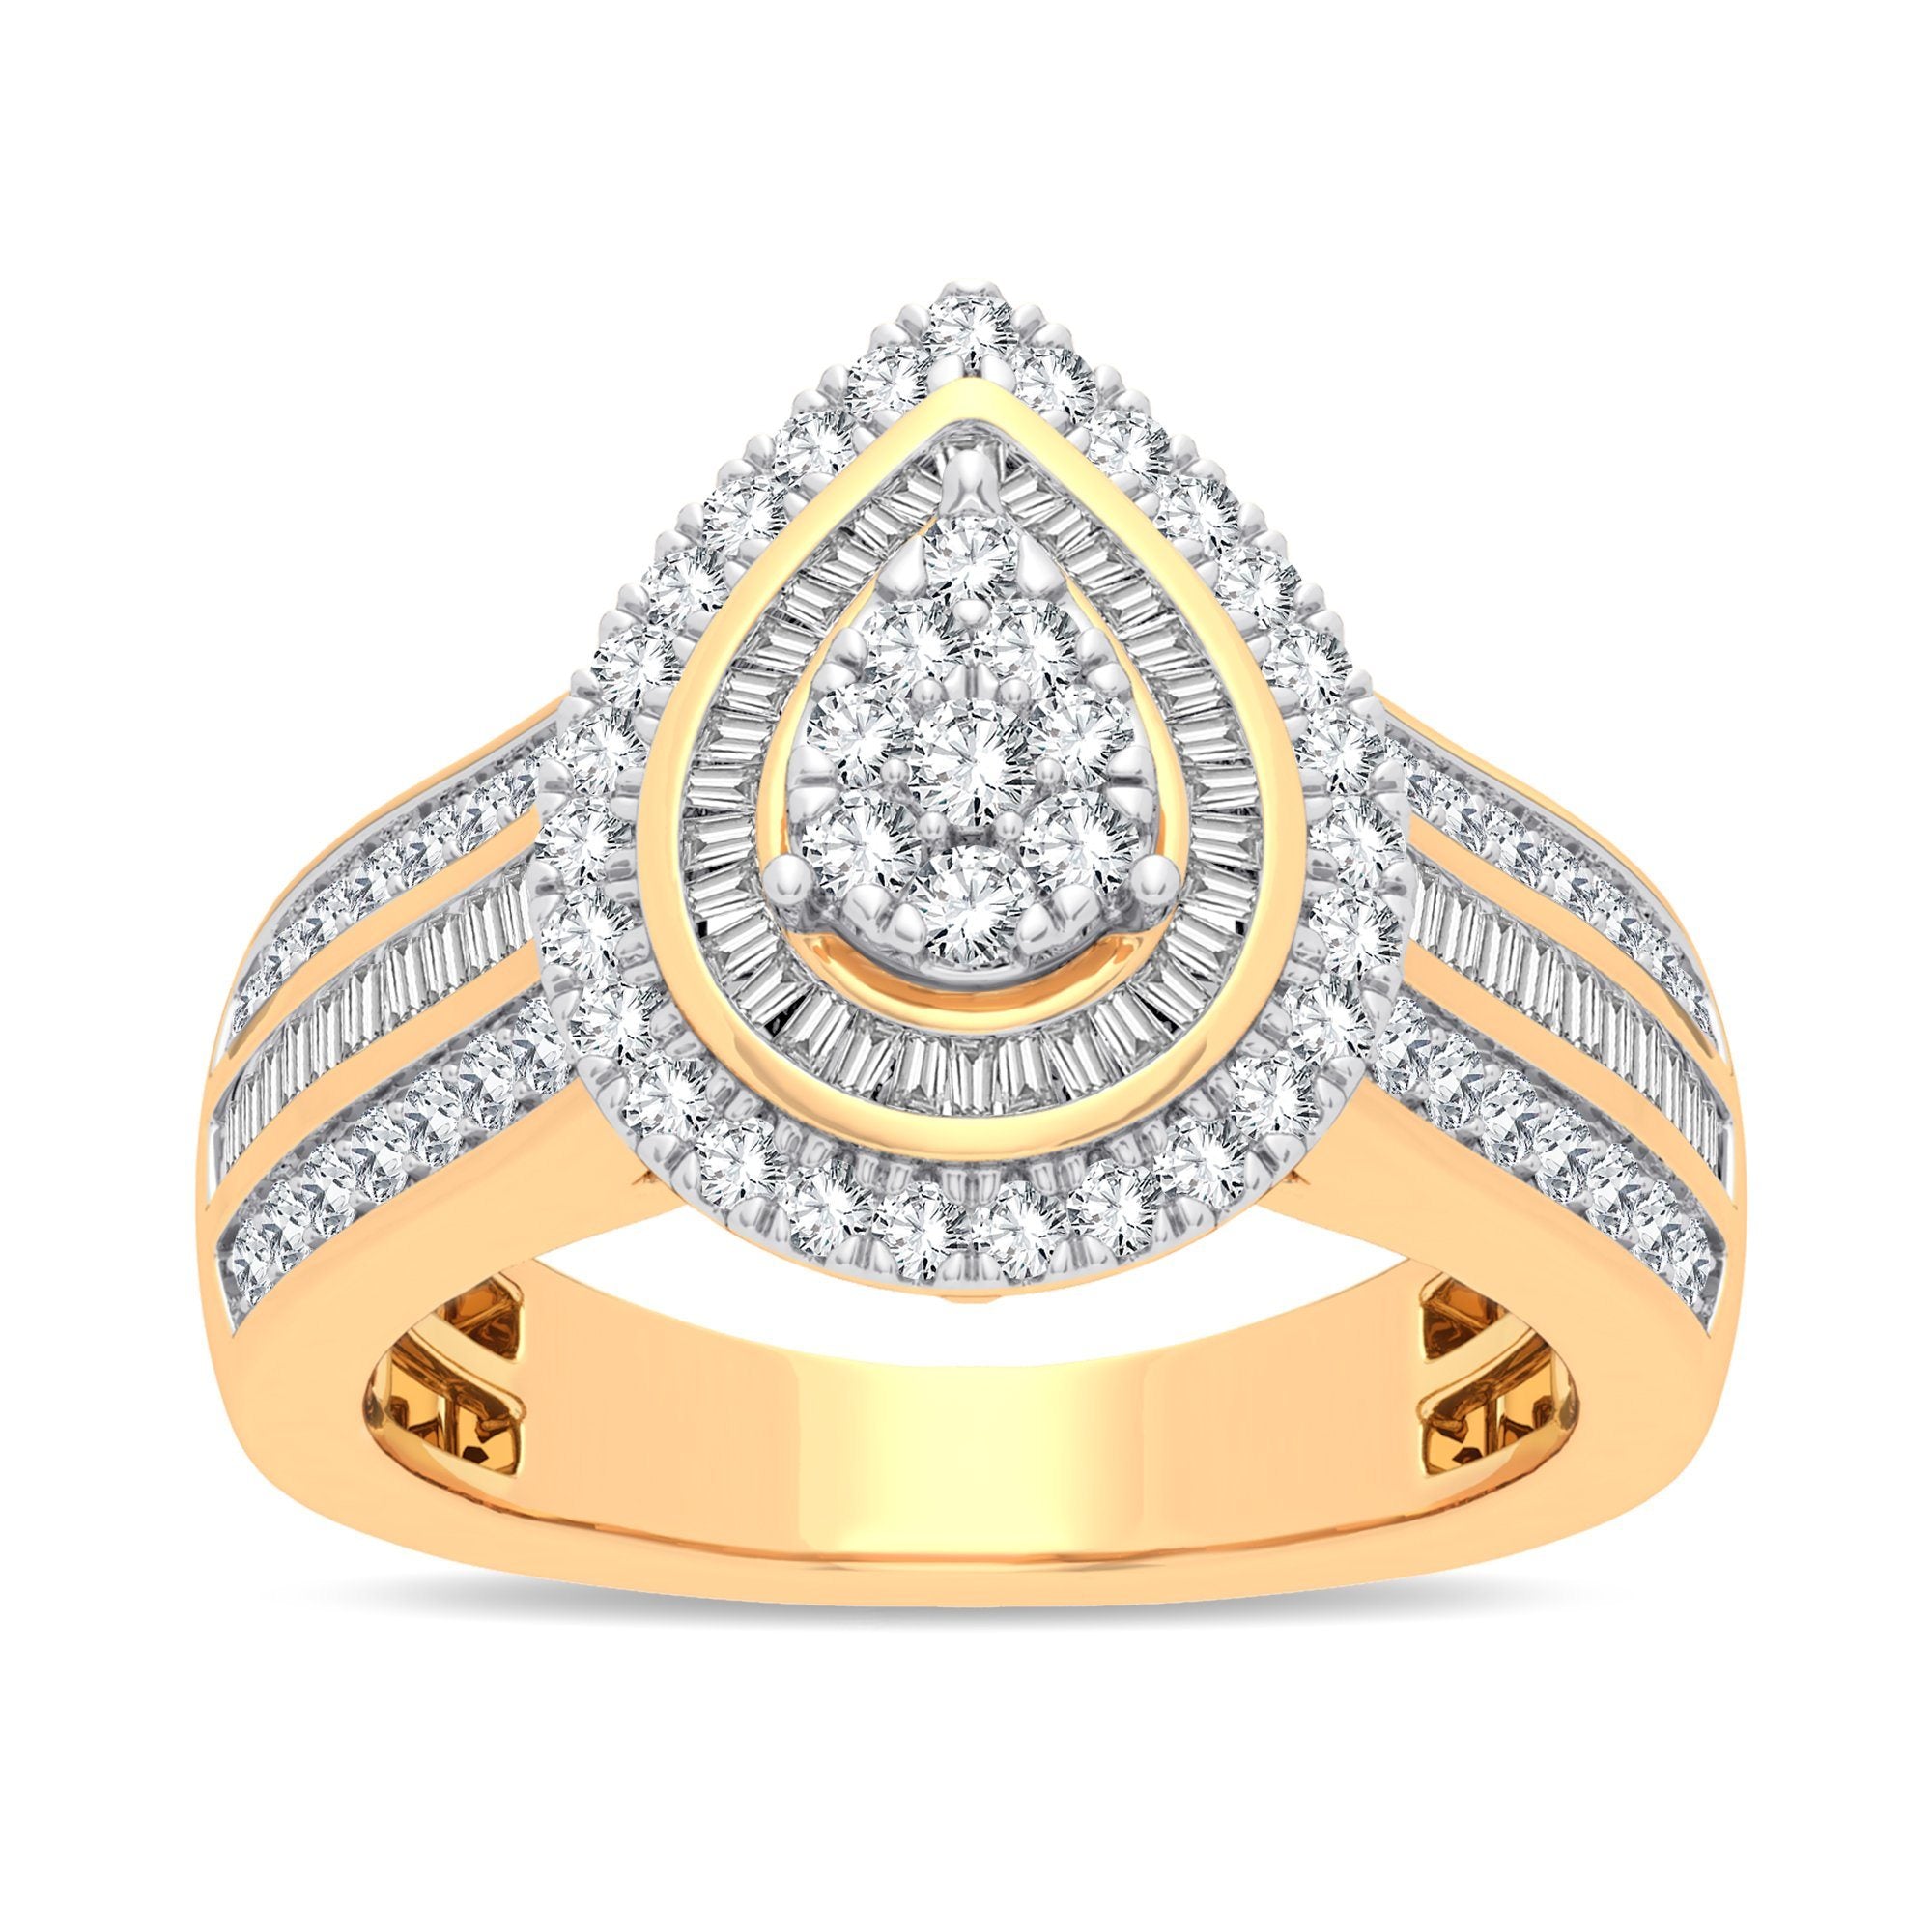 Pear Halo Ring with 1.00ct of Diamonds in 9ct Yellow Gold Rings Bevilles 